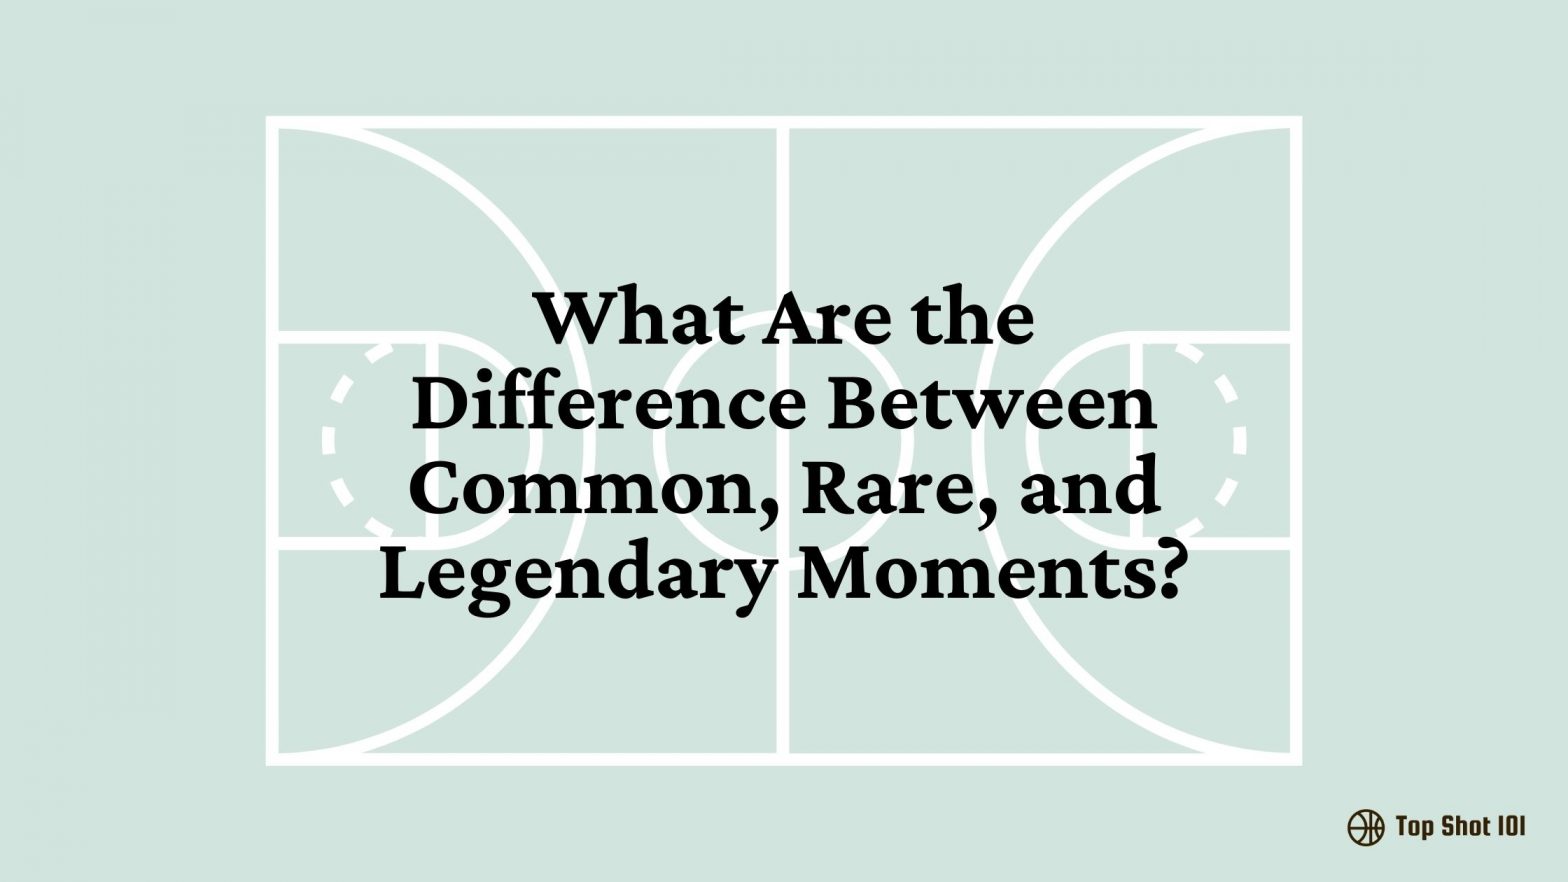 What Are the Difference Between Common, Rare, and Legendary Moments?